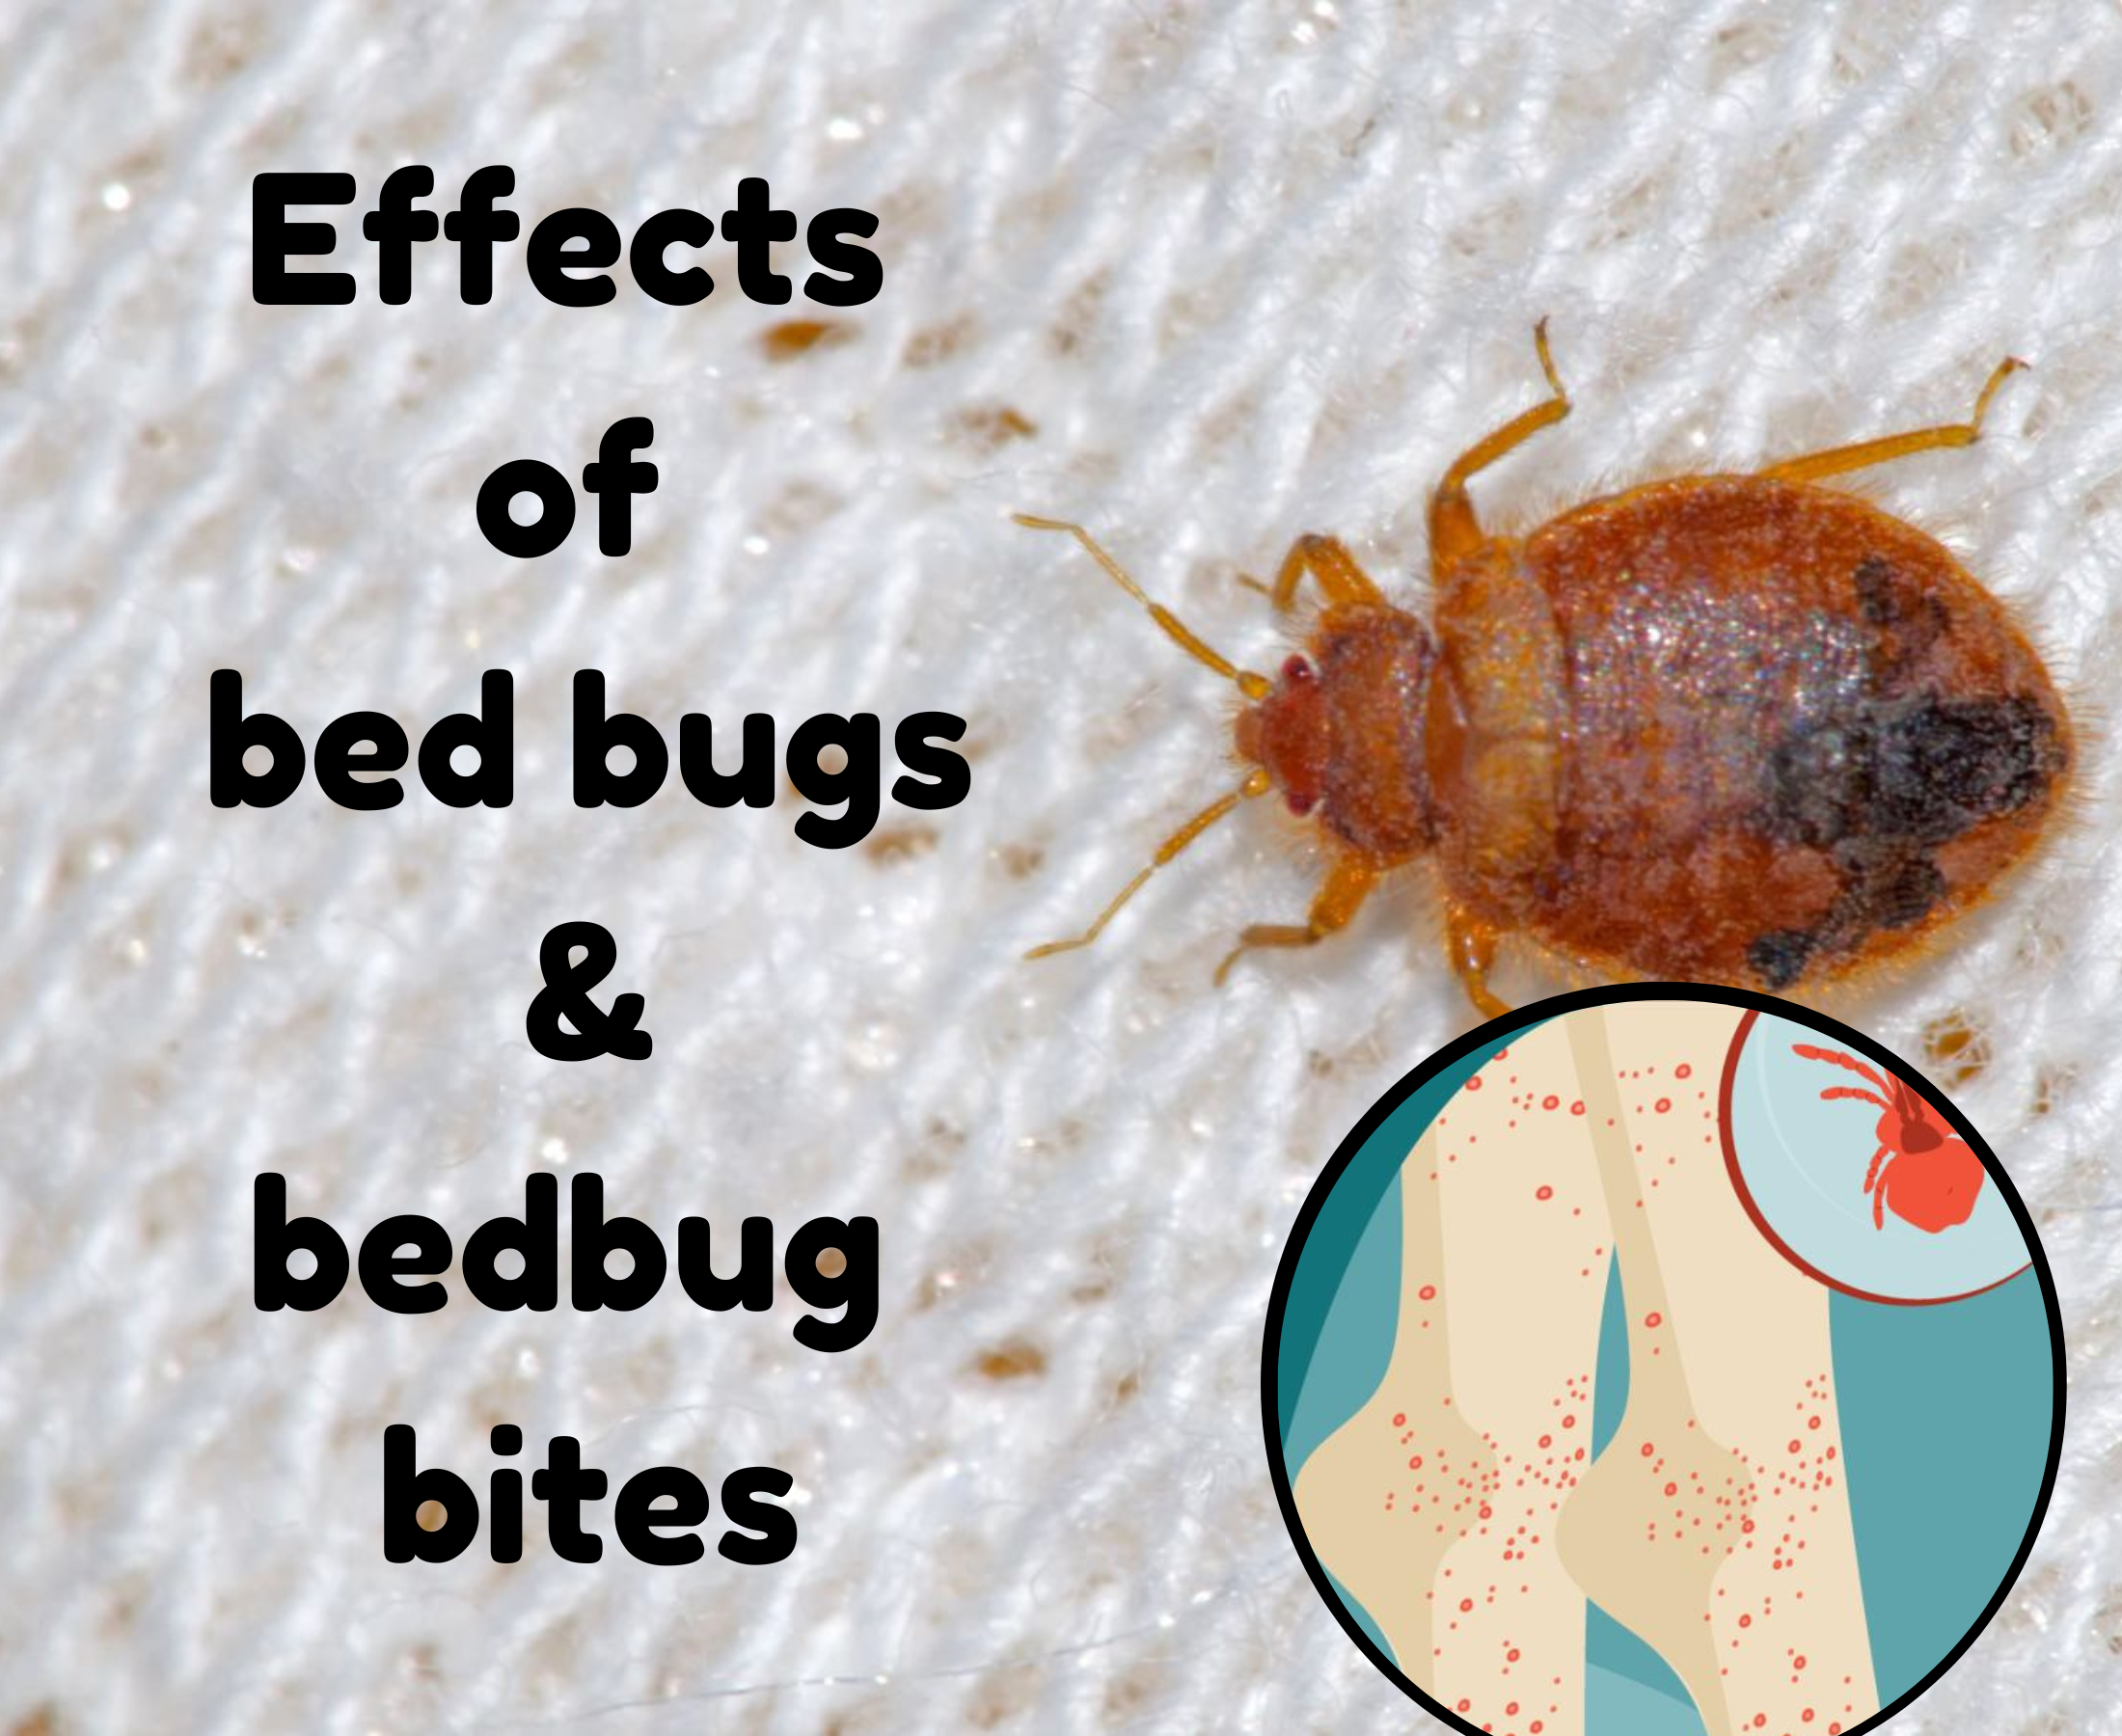 What are bed bugs? How do their bites affect you?